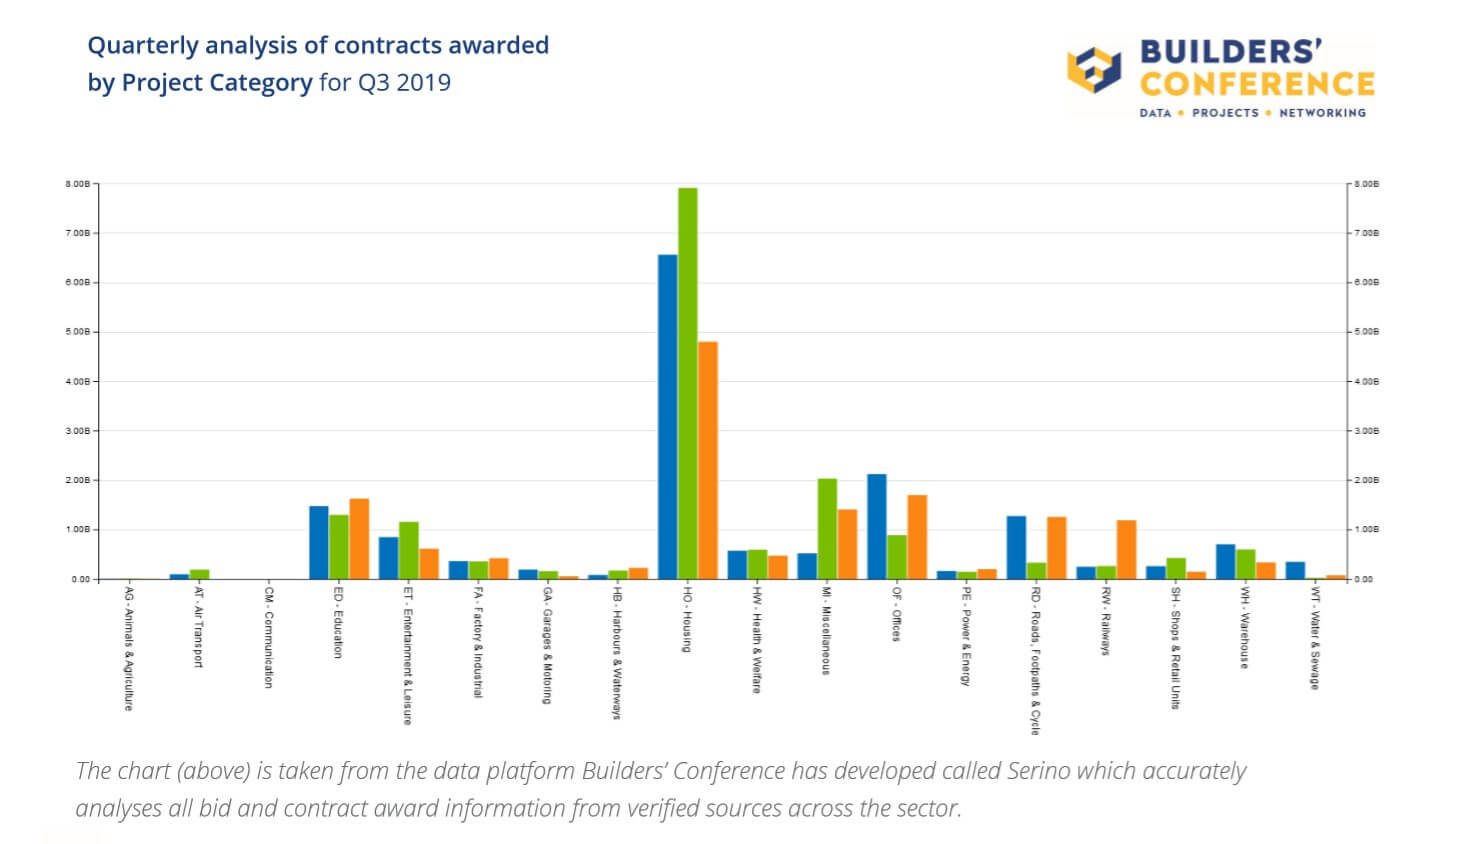 alysis by project category © Copyright 2018 The Builders' Conference W: buildersconference.co.uk T: 0208 770 0111 E: info@buildersconf.co.uk Quarterly analysis of contracts awarded by Project Category for Q3 2019